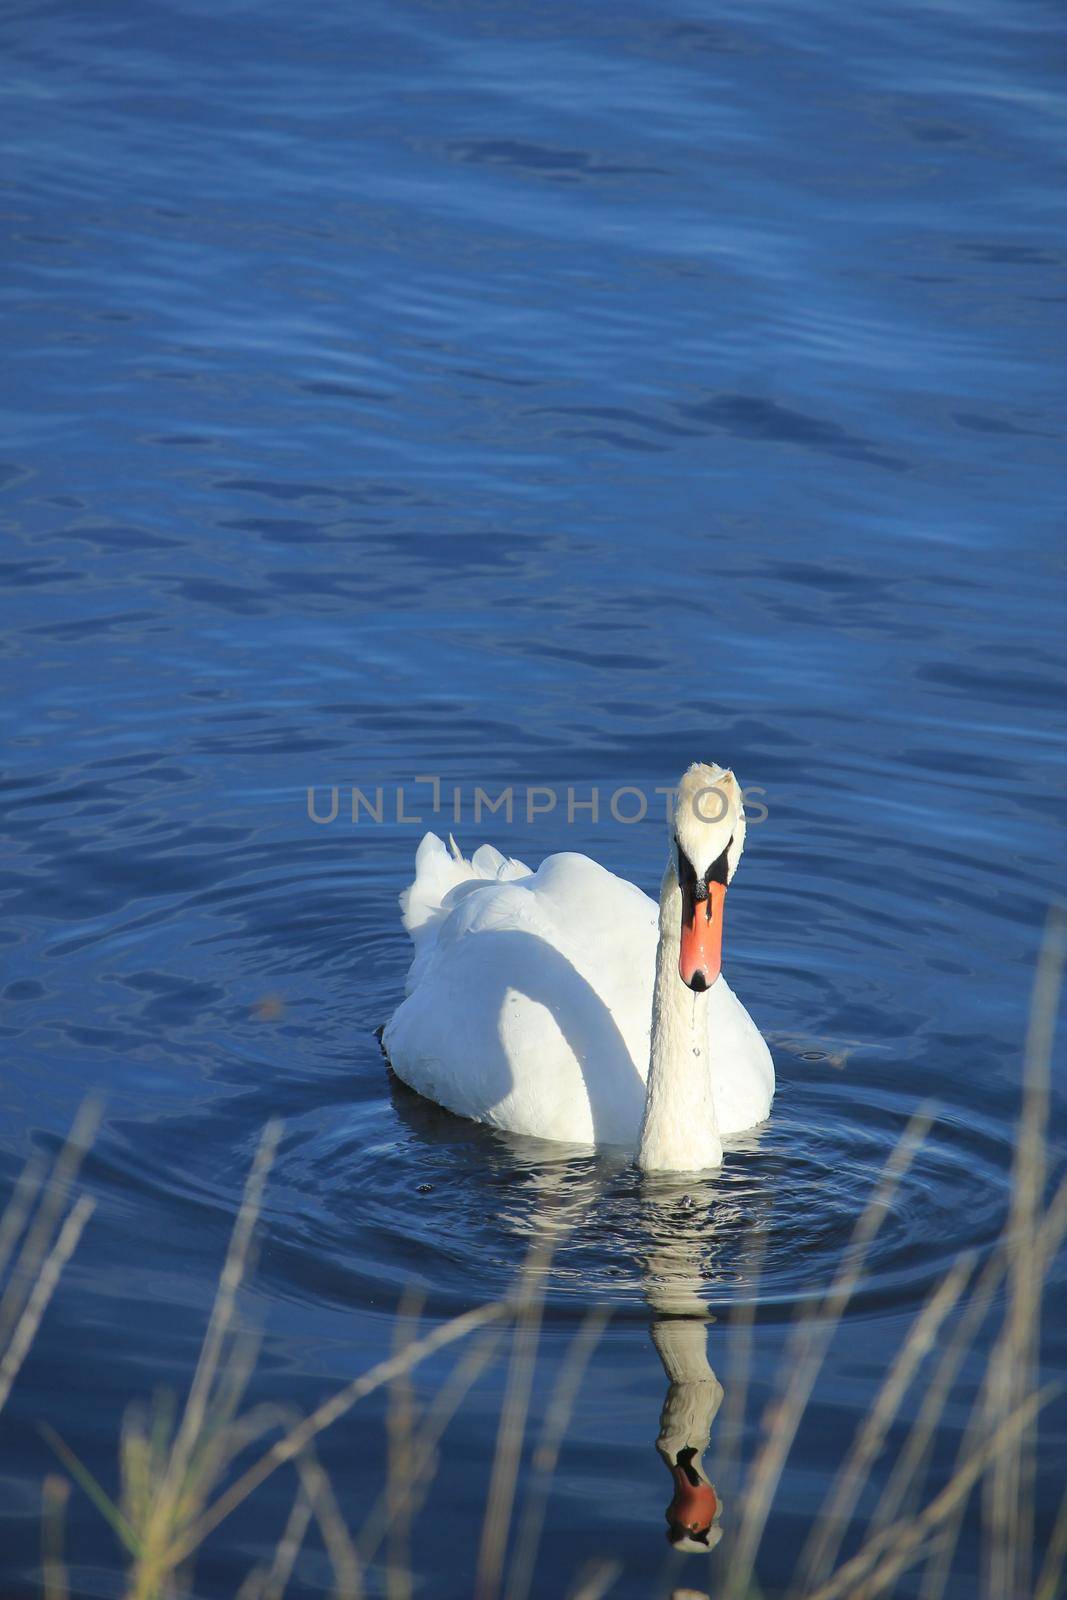 A single swan swimming on quiet water by studioportosabbia